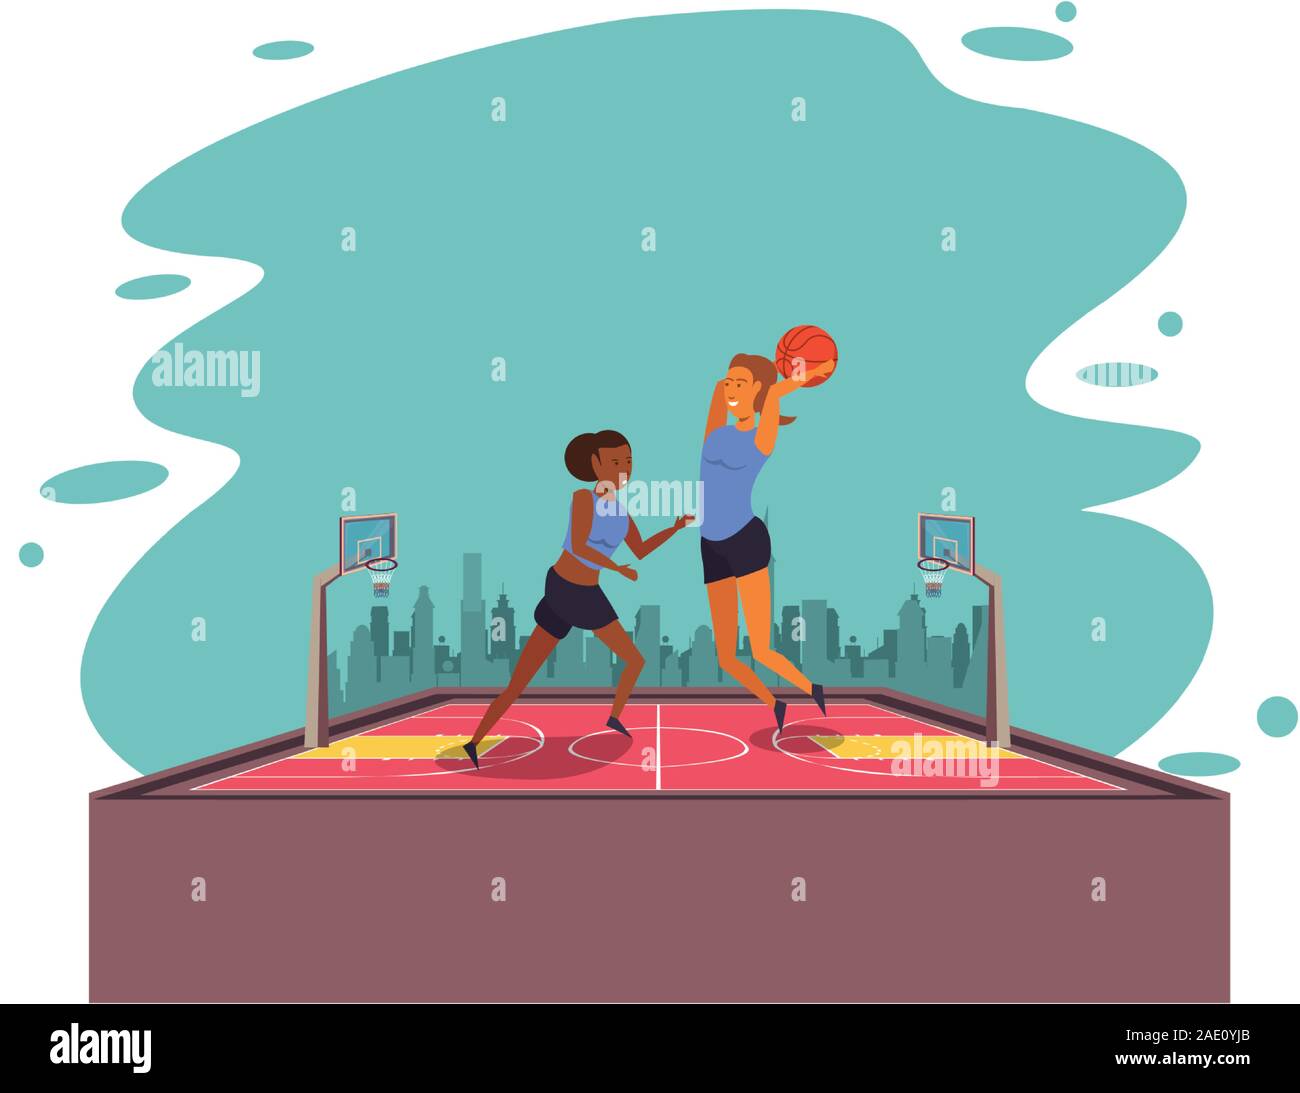 young women athletes playing basketball with balloon Stock Vector